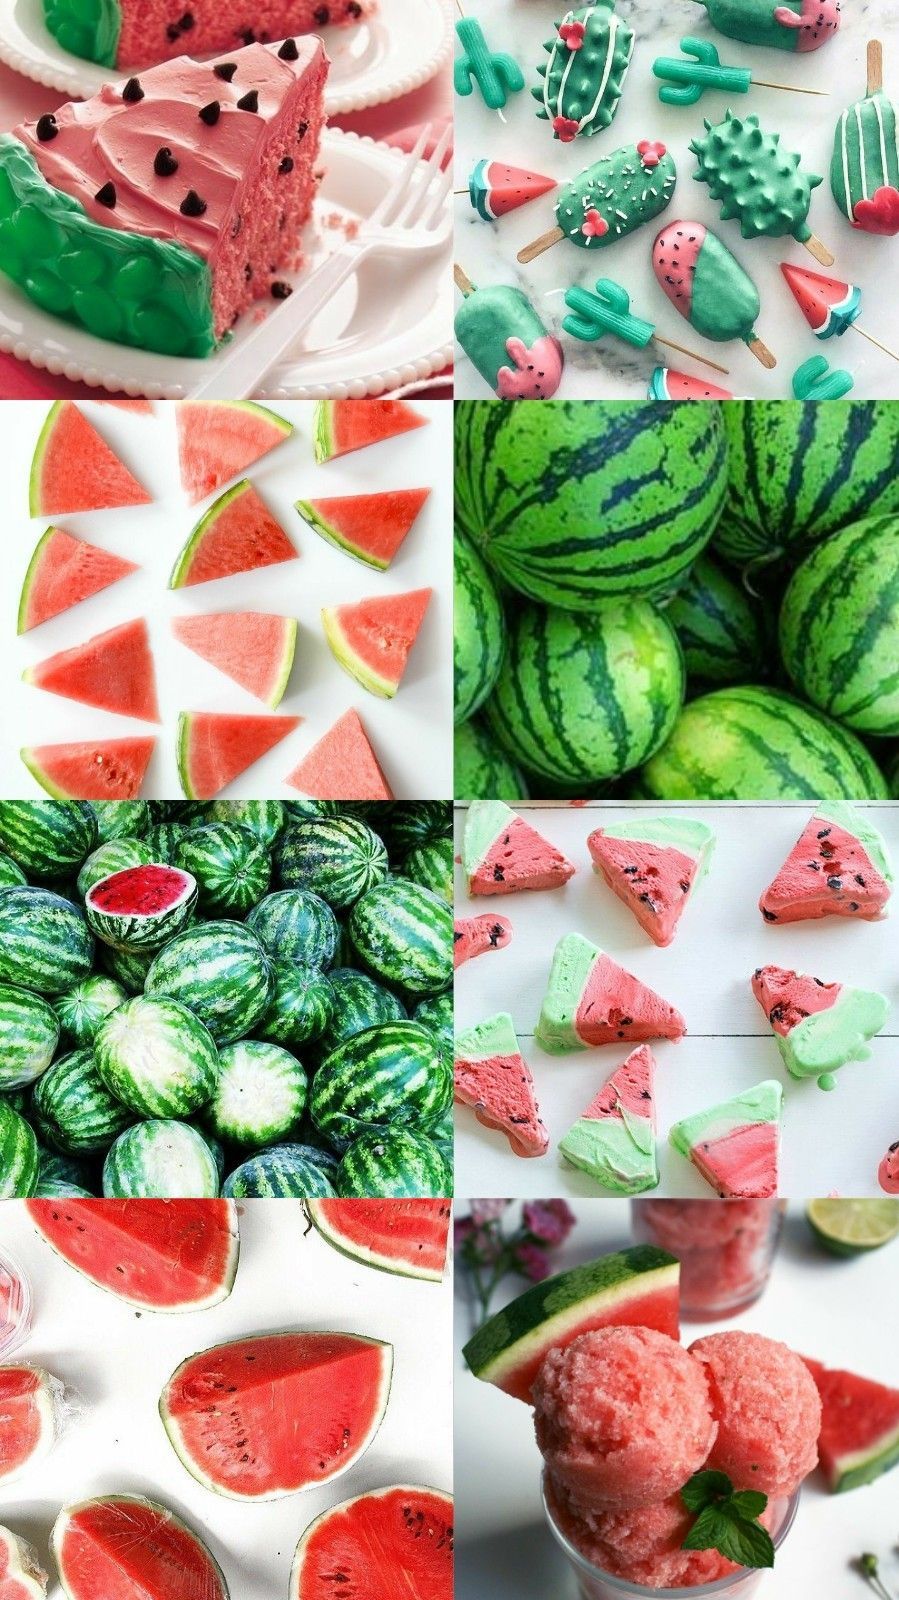 A collage of watermelon slices and other food - Watermelon